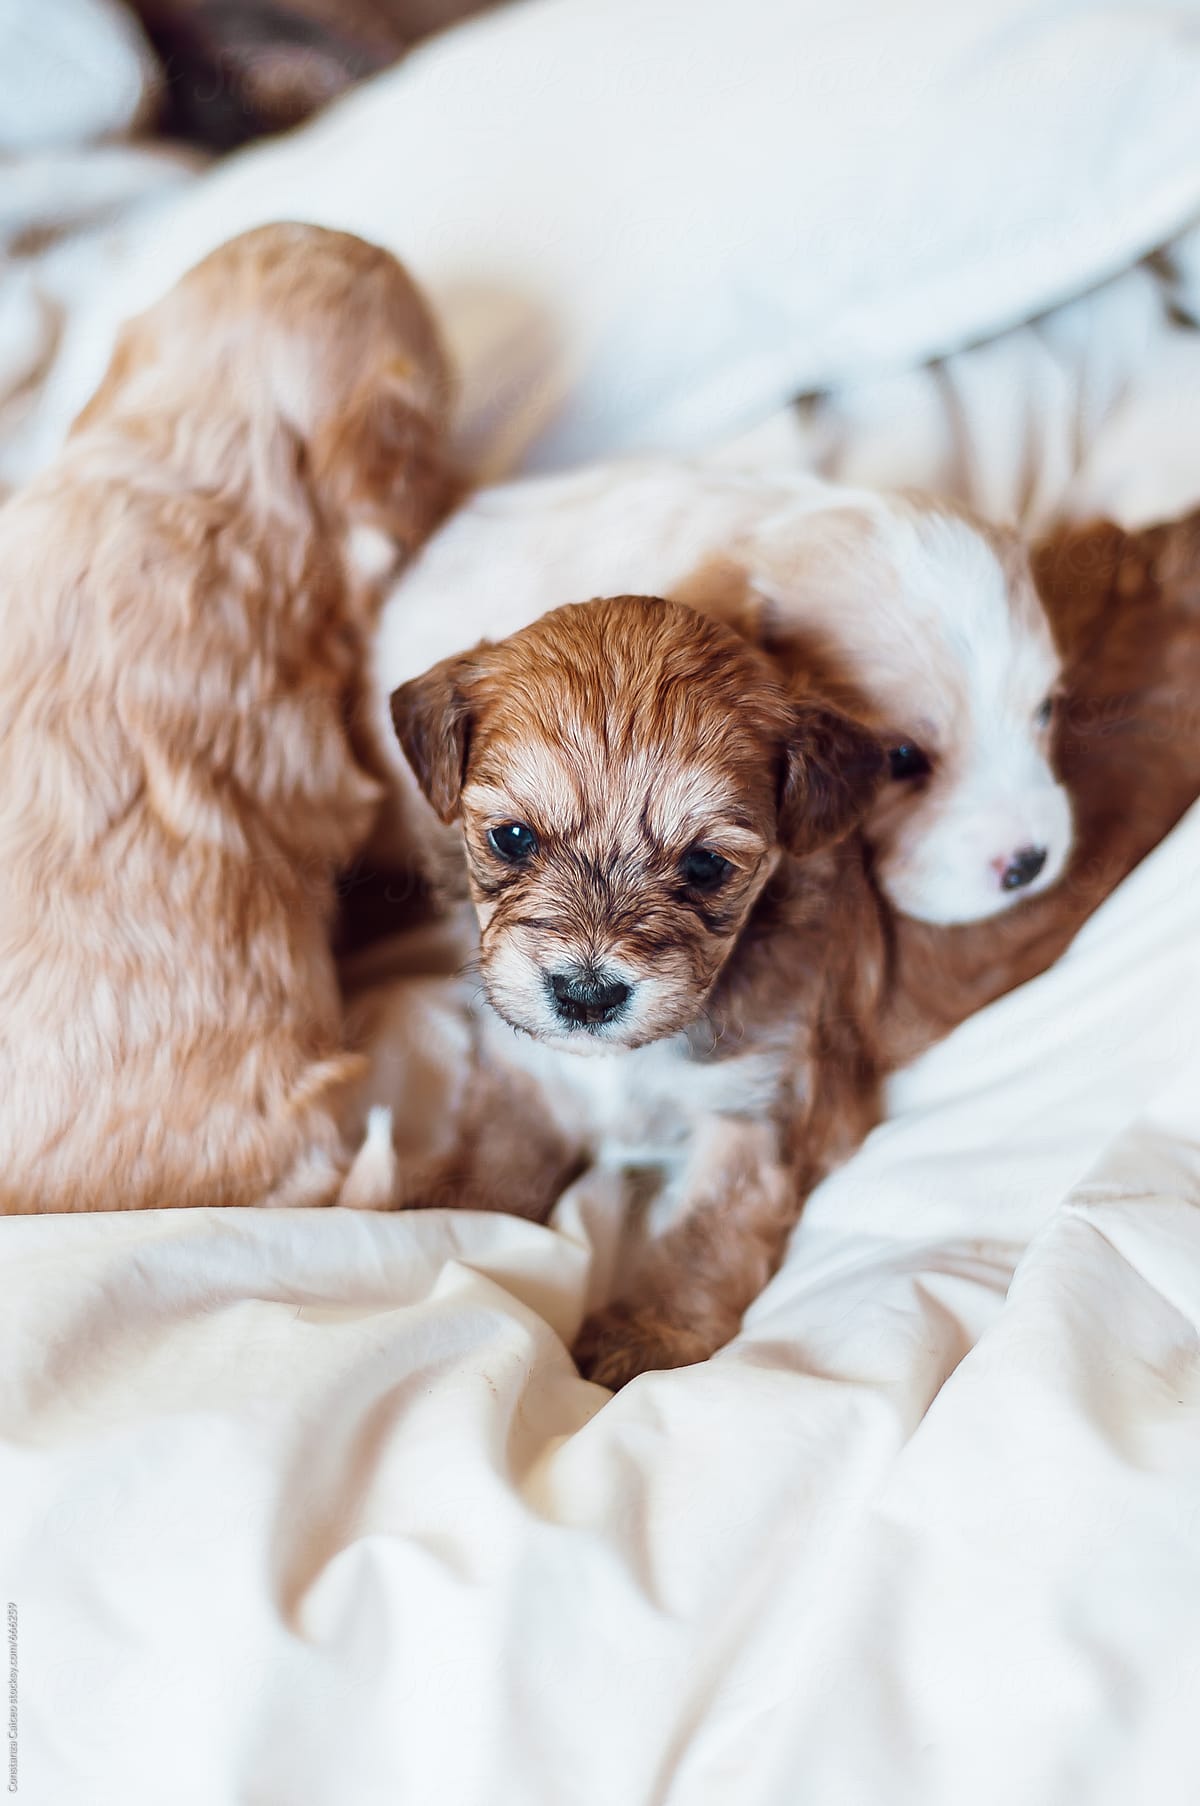 Little puppies being affective to each other on white sheets